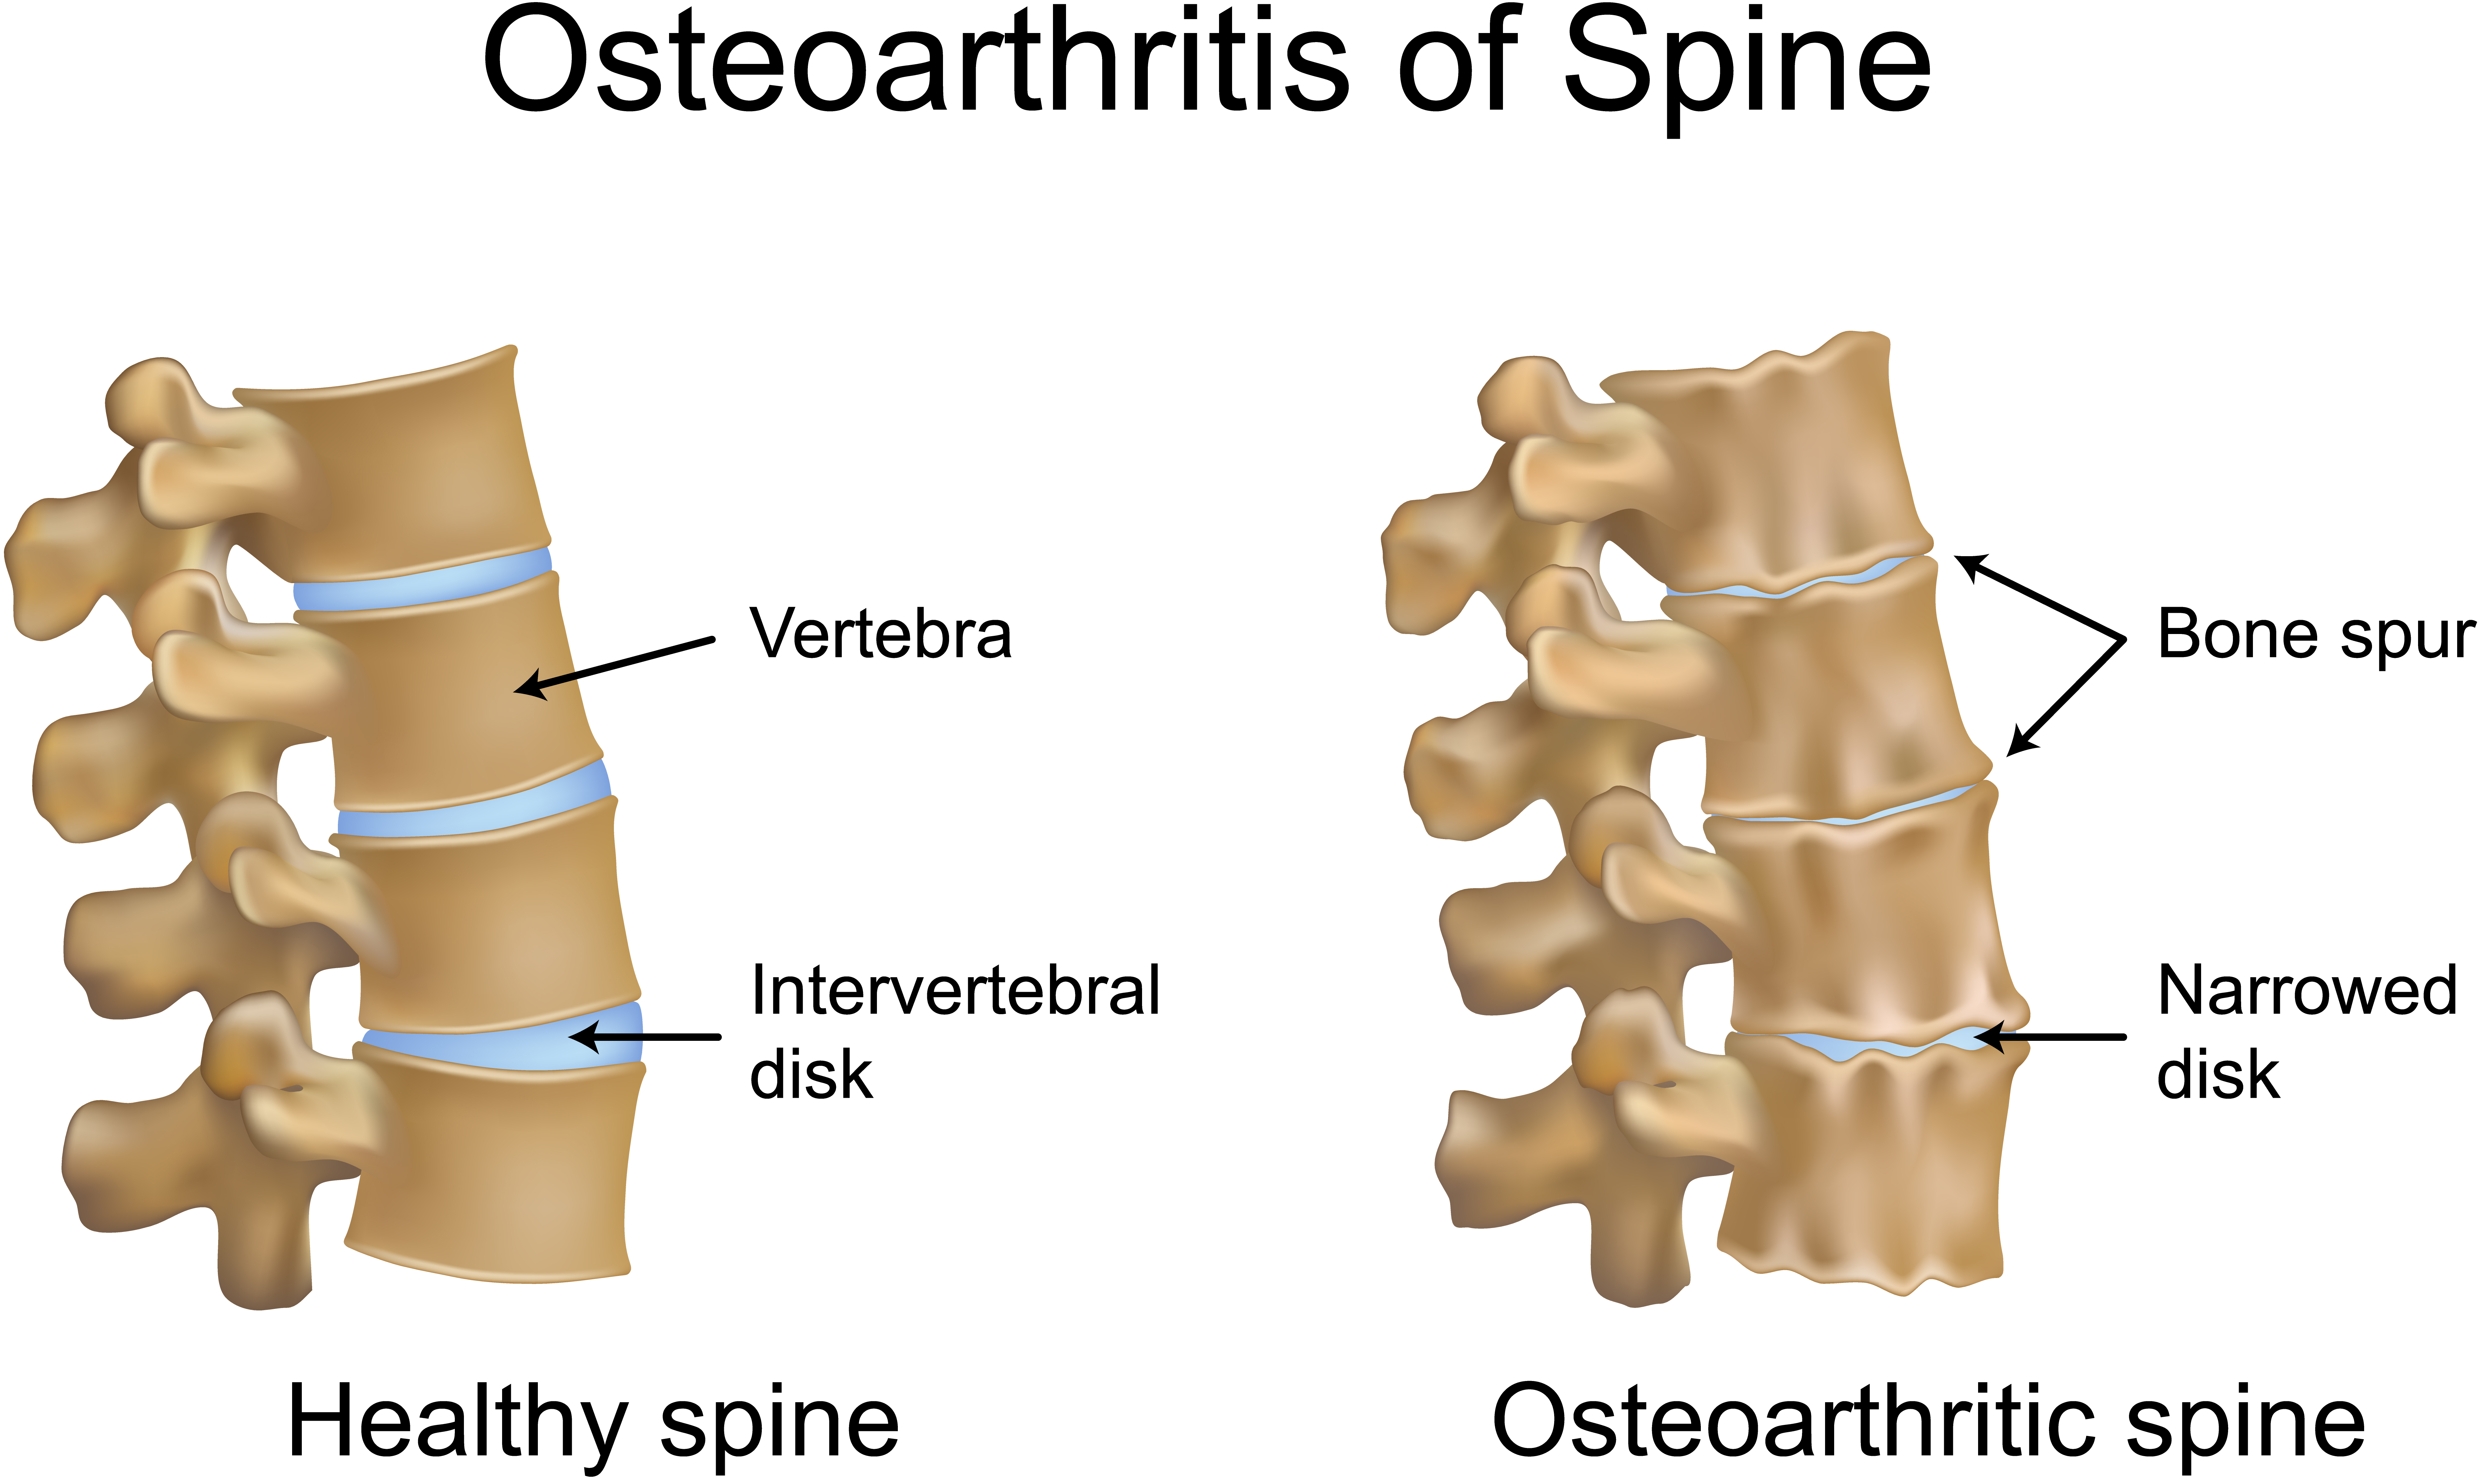 When should you seek treatment for an osteophyte?